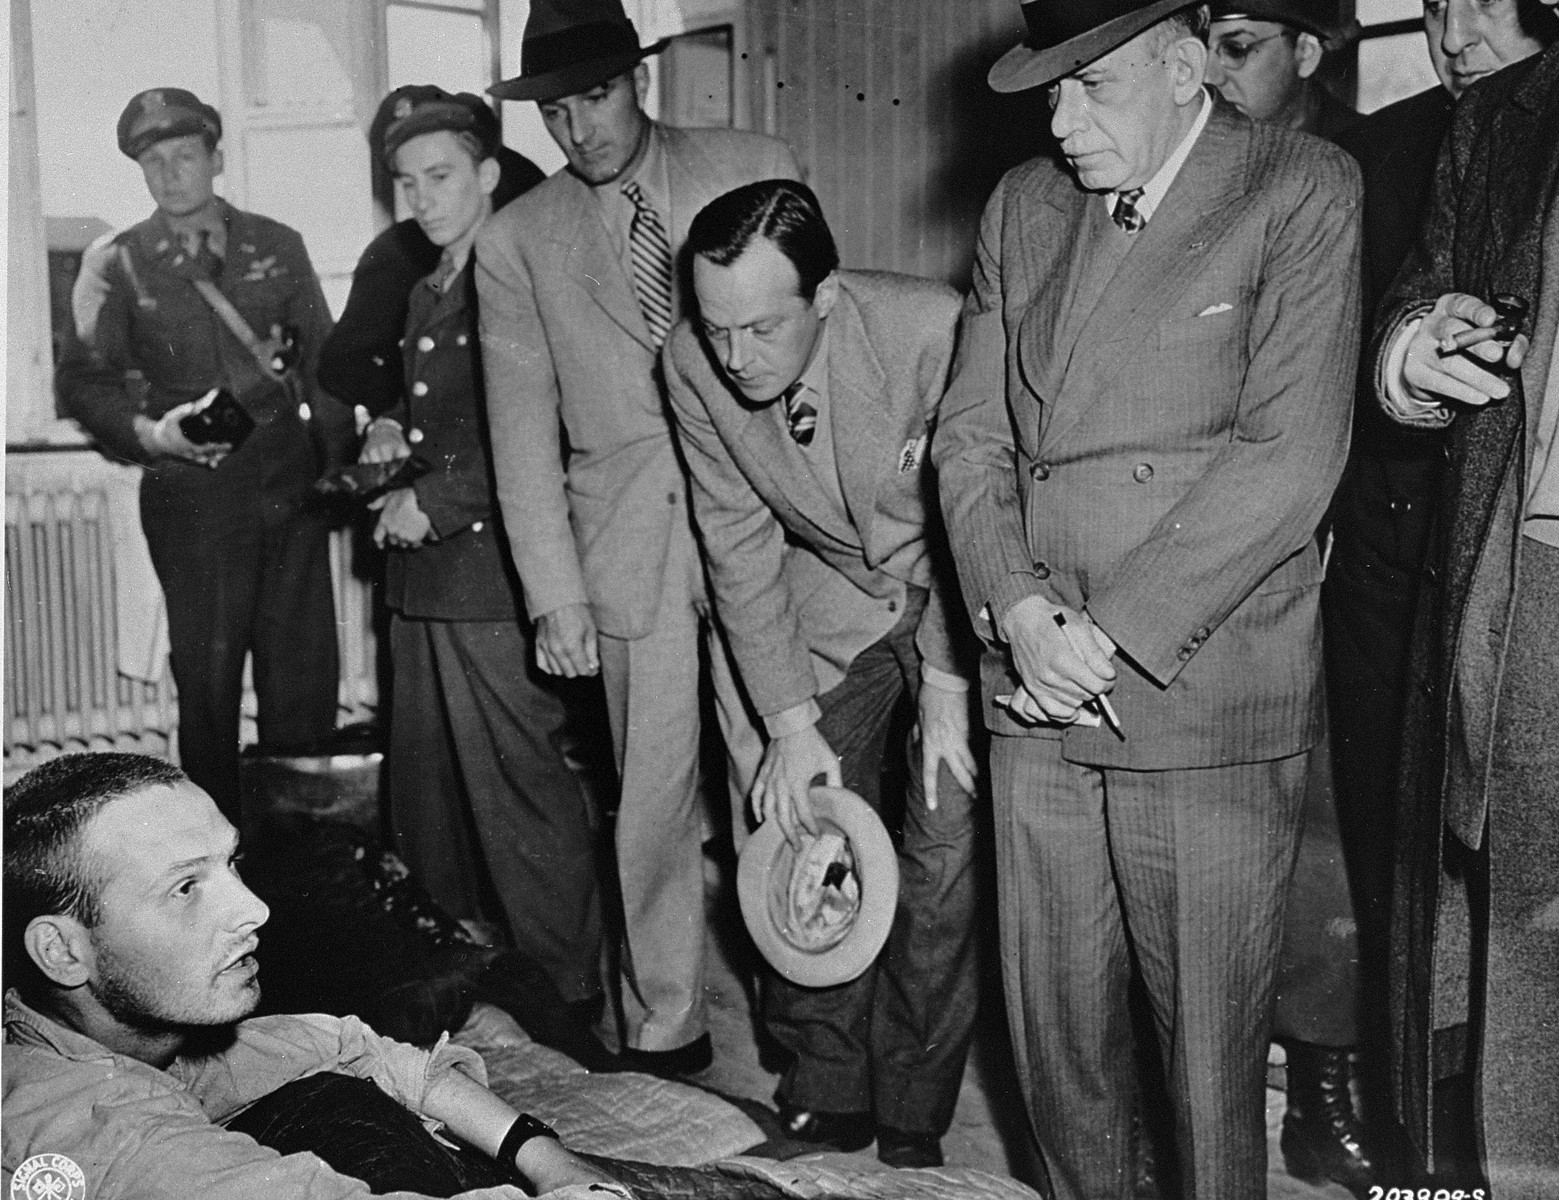 American newspaper editors visit a hospital in the newly liberated Buchenwald concentration camp to speak with survivors about the crimes they witnessed.  

Pictured from left to right are: Norman Chandler of the L. A. Times, William I. Nichols of This Week Magazine, and Julius Ochs Adler of the New York Times.